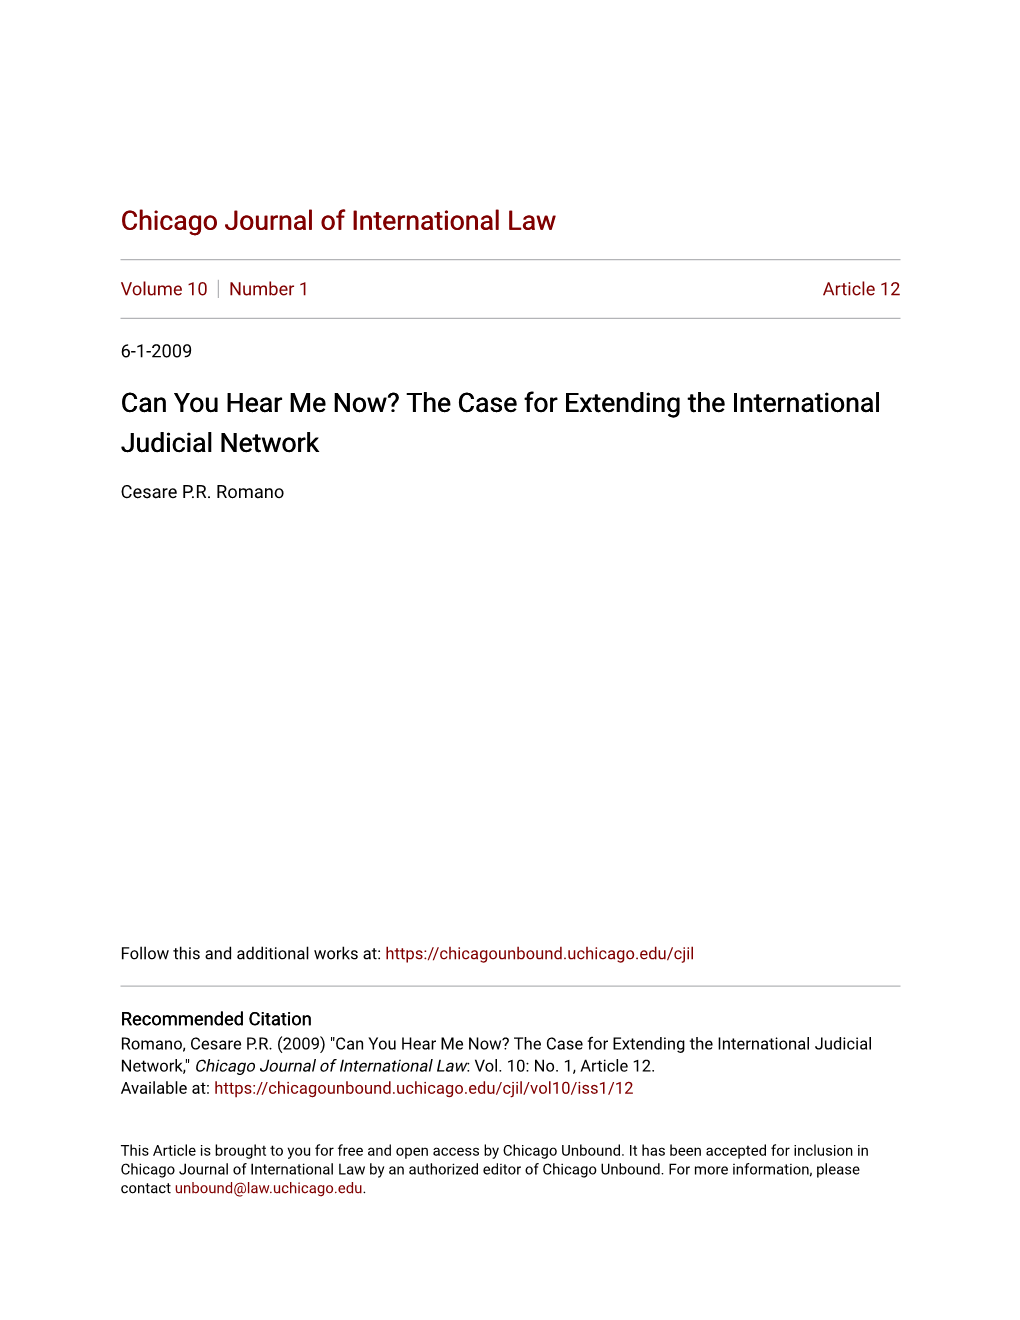 The Case for Extending the International Judicial Network